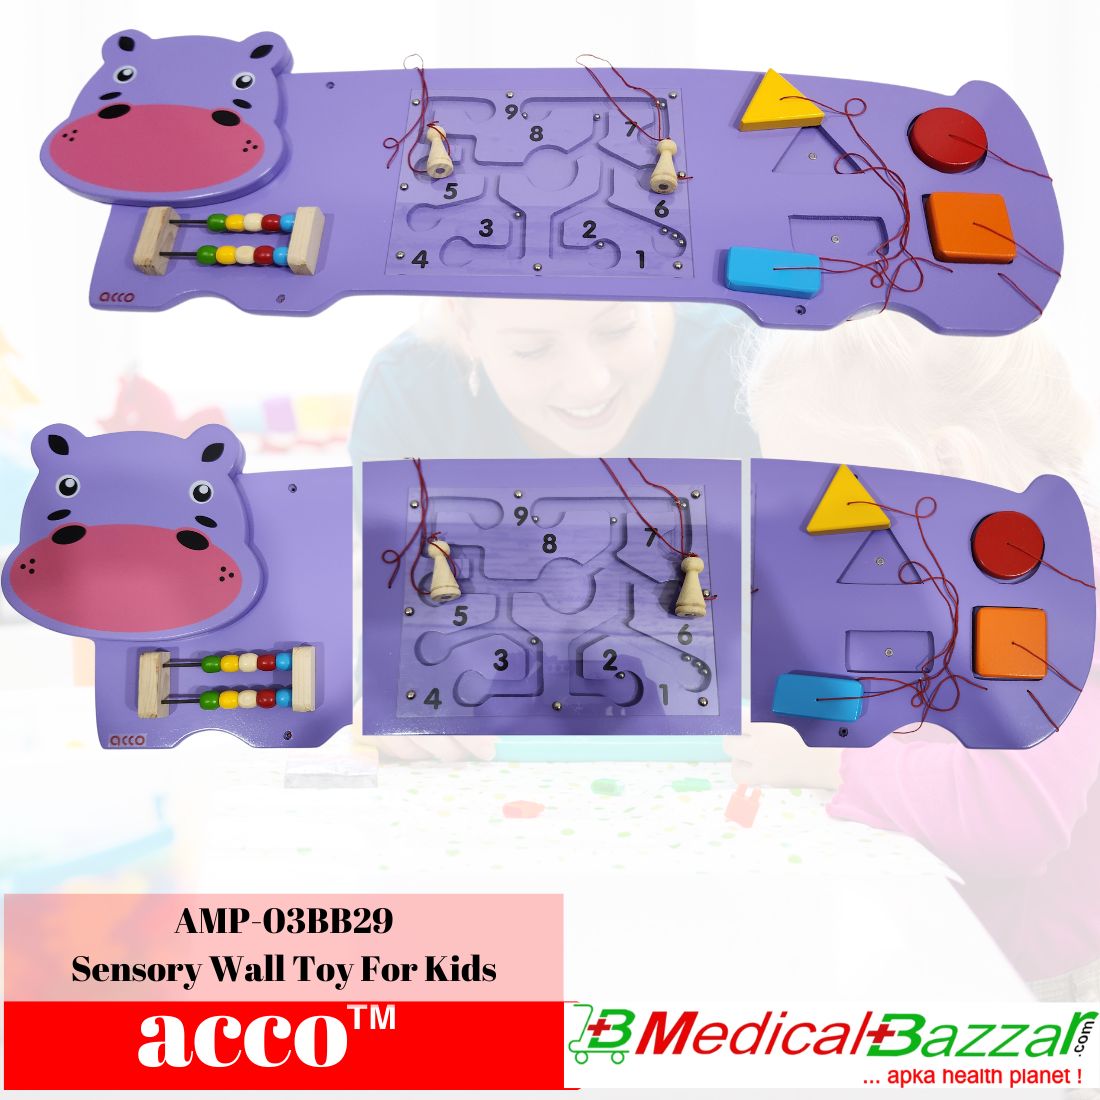 acco Sensory Wall toy For Kids